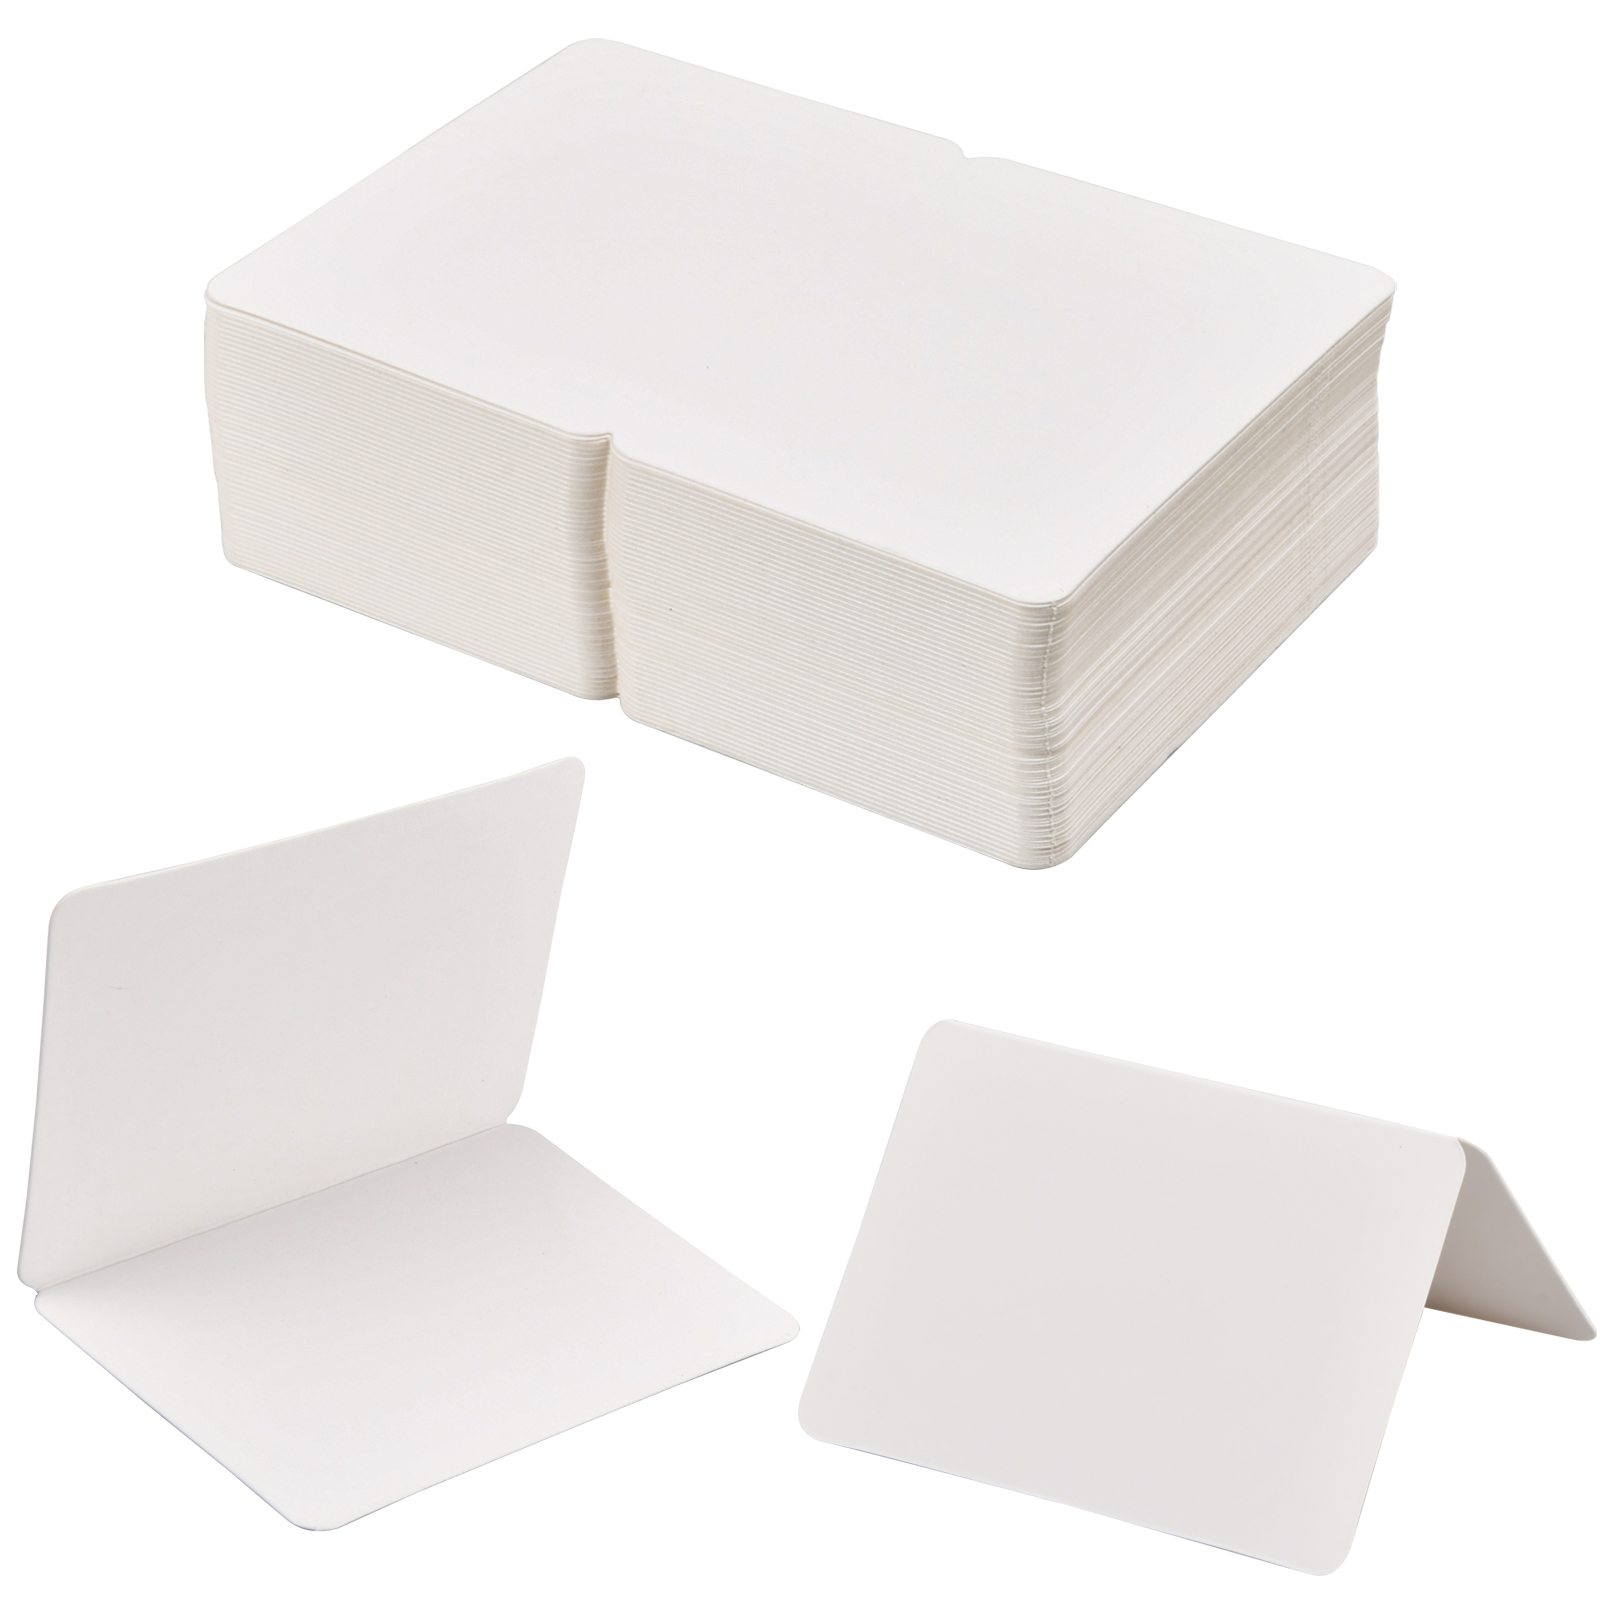 48 Pack Kraft Paper Photo Insert Cards with Envelopes, 4x6 Paper